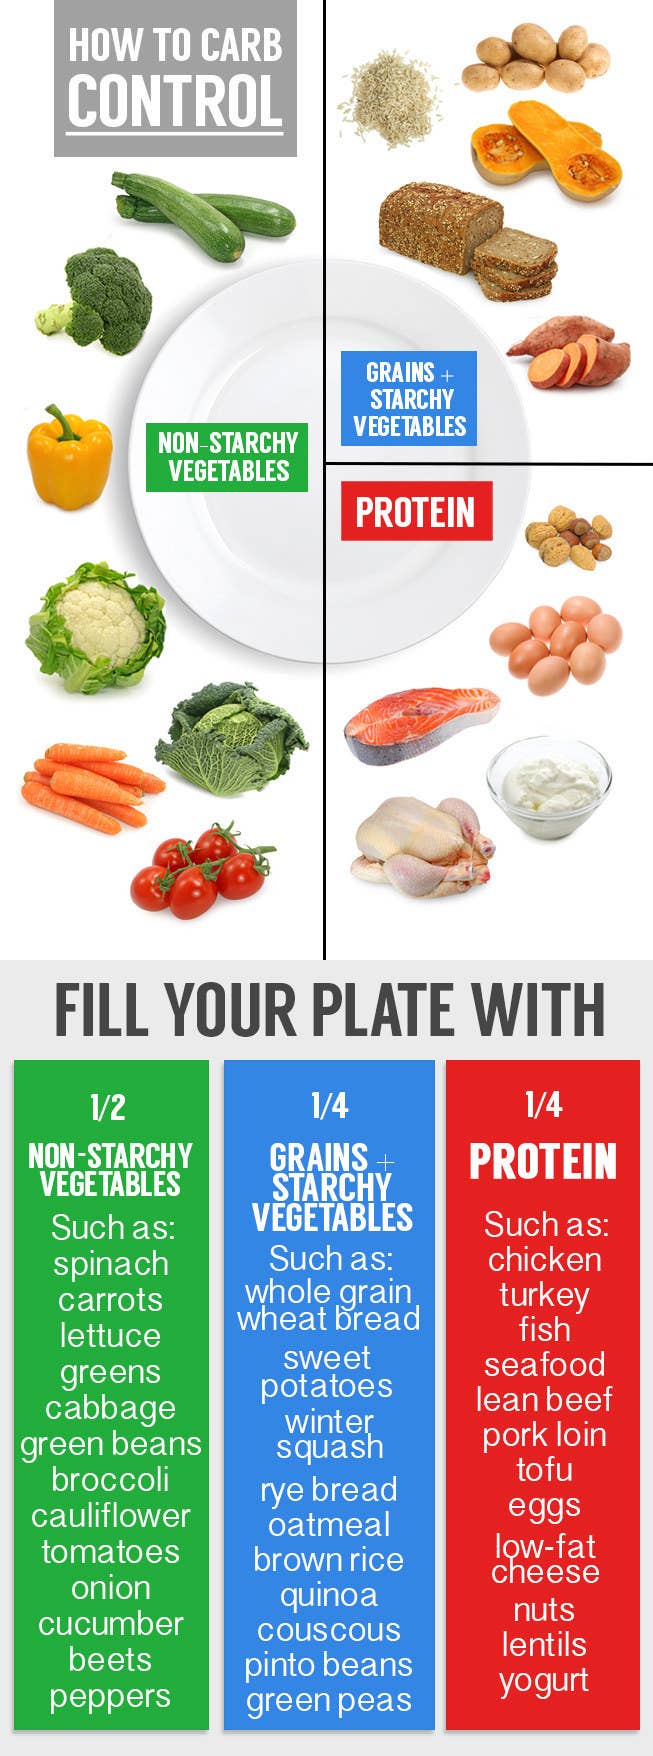 Based on the Create Your Plate healthy eating guideline recommended by the American Diabetes Association.